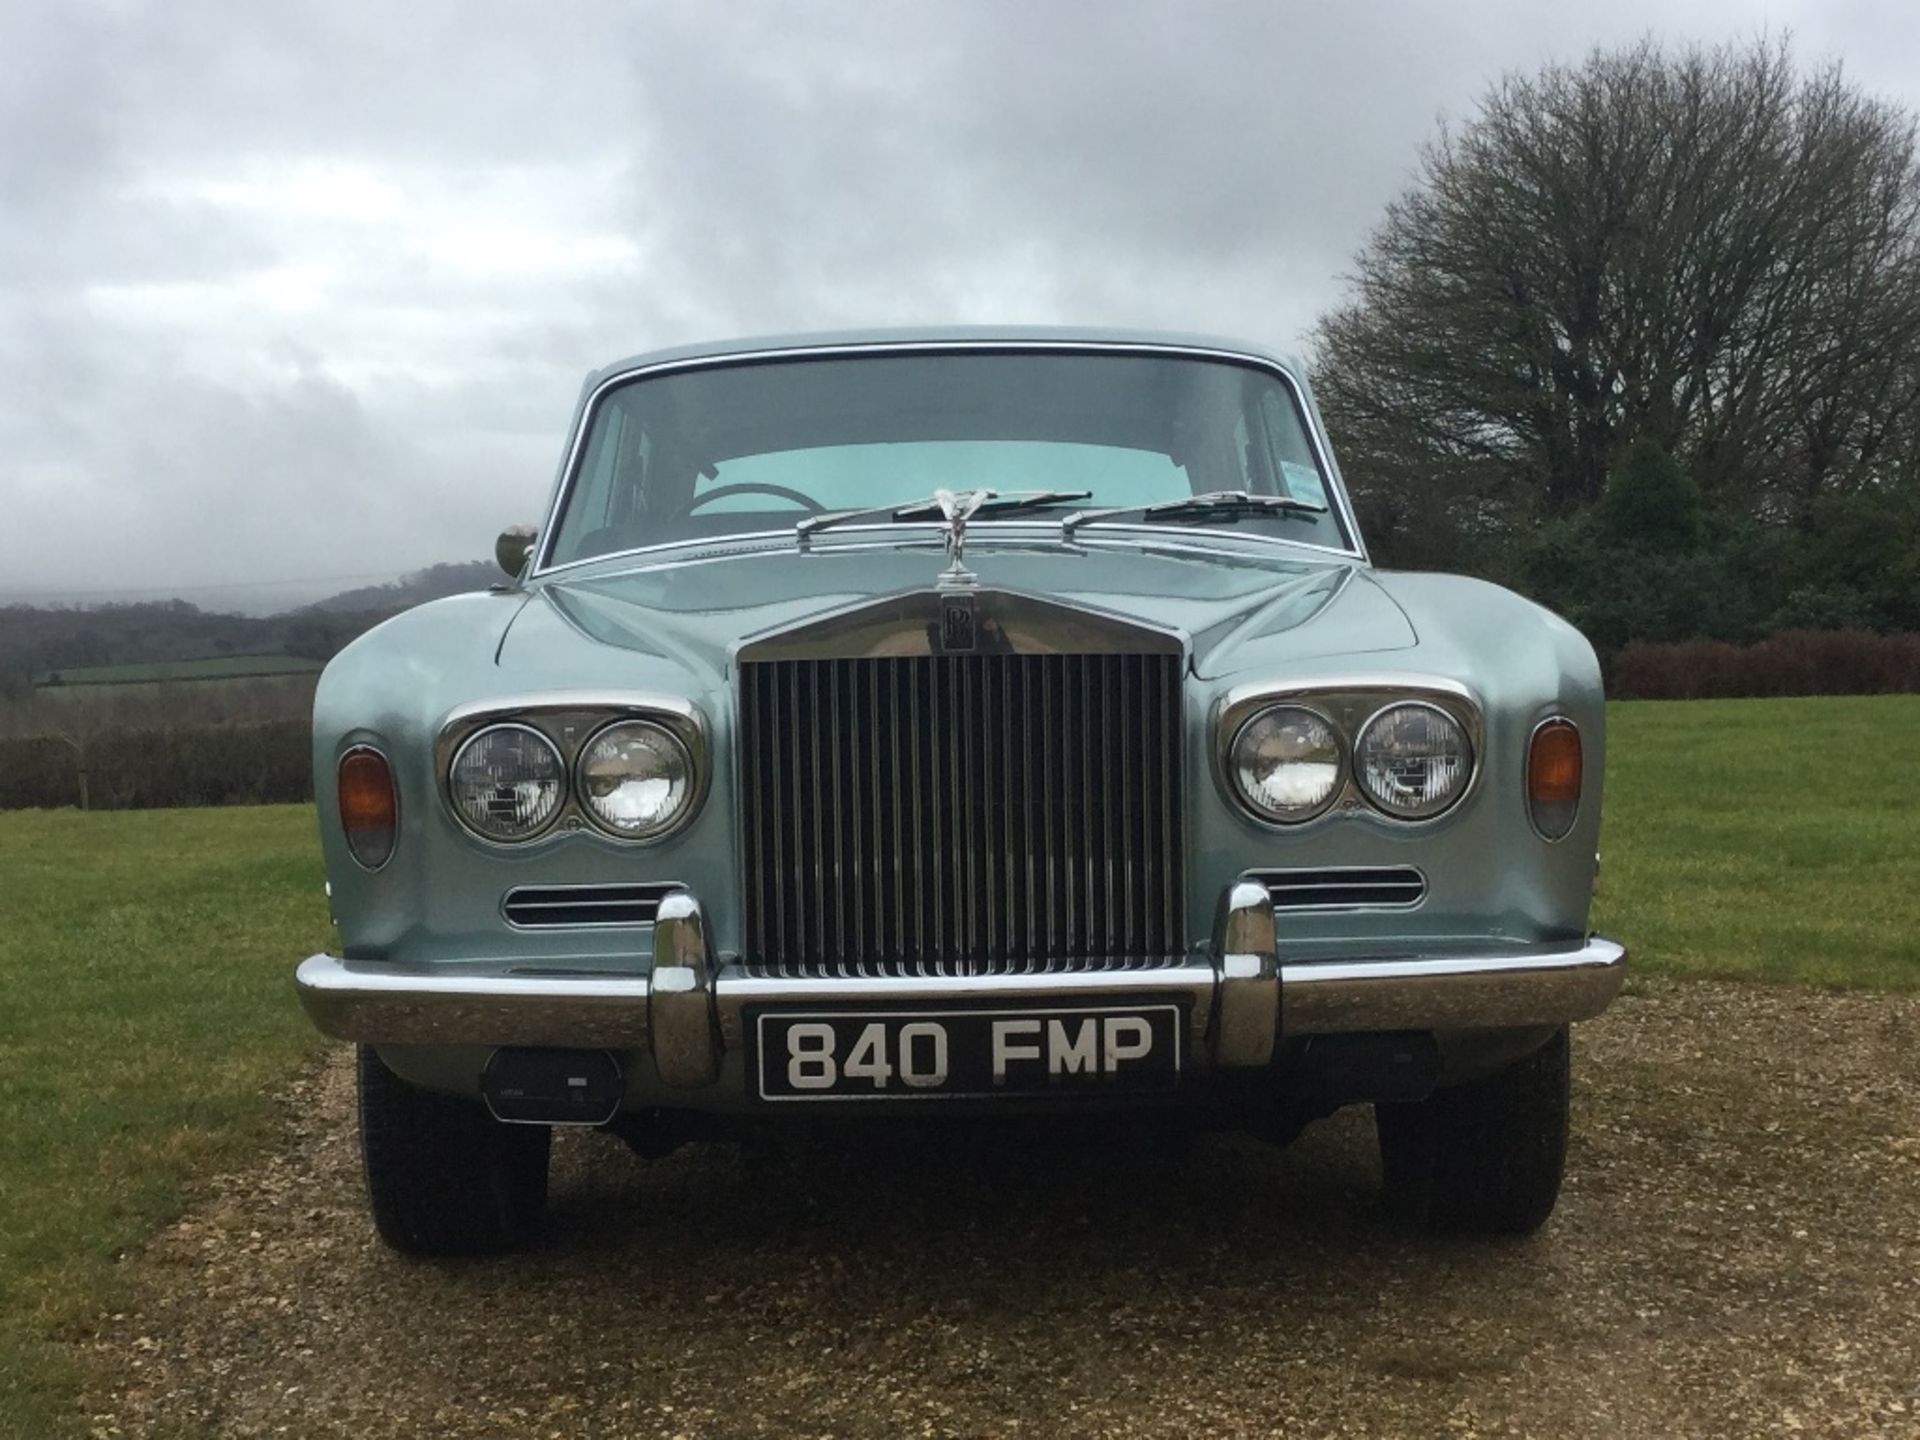 A 1973 Rolls Royce Silver Shadow I, registration number 840 FMP, opalescent silver blue metallic. - Image 3 of 5